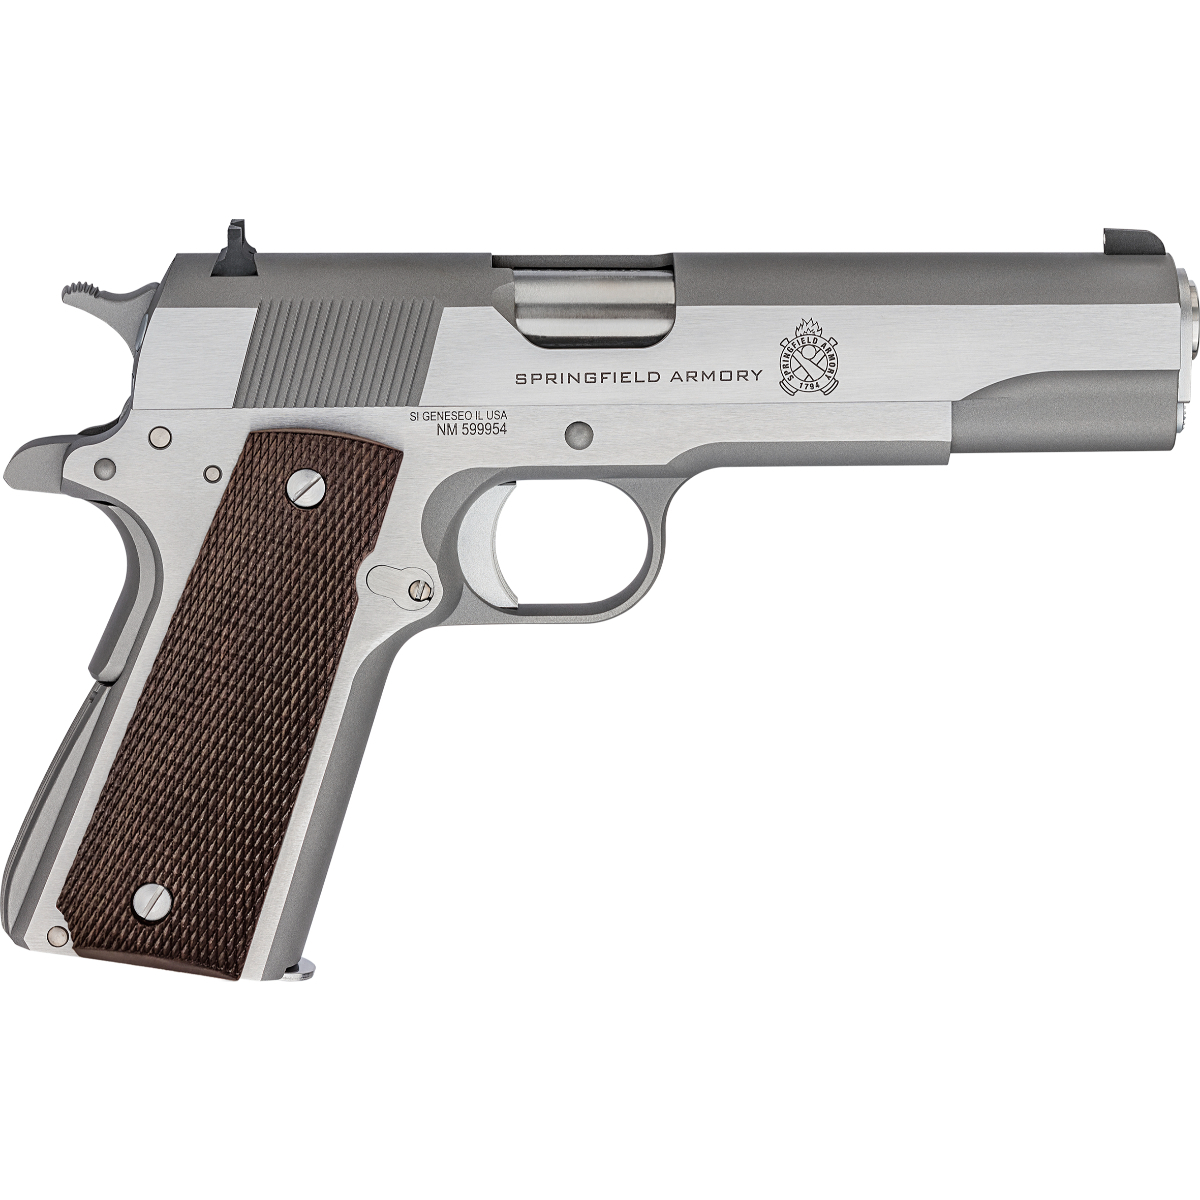 DEFEND YOUR LEGACY SERIES 1911 MIL-SPEC .45 ACP HANDGUN – STAINLESS - 1